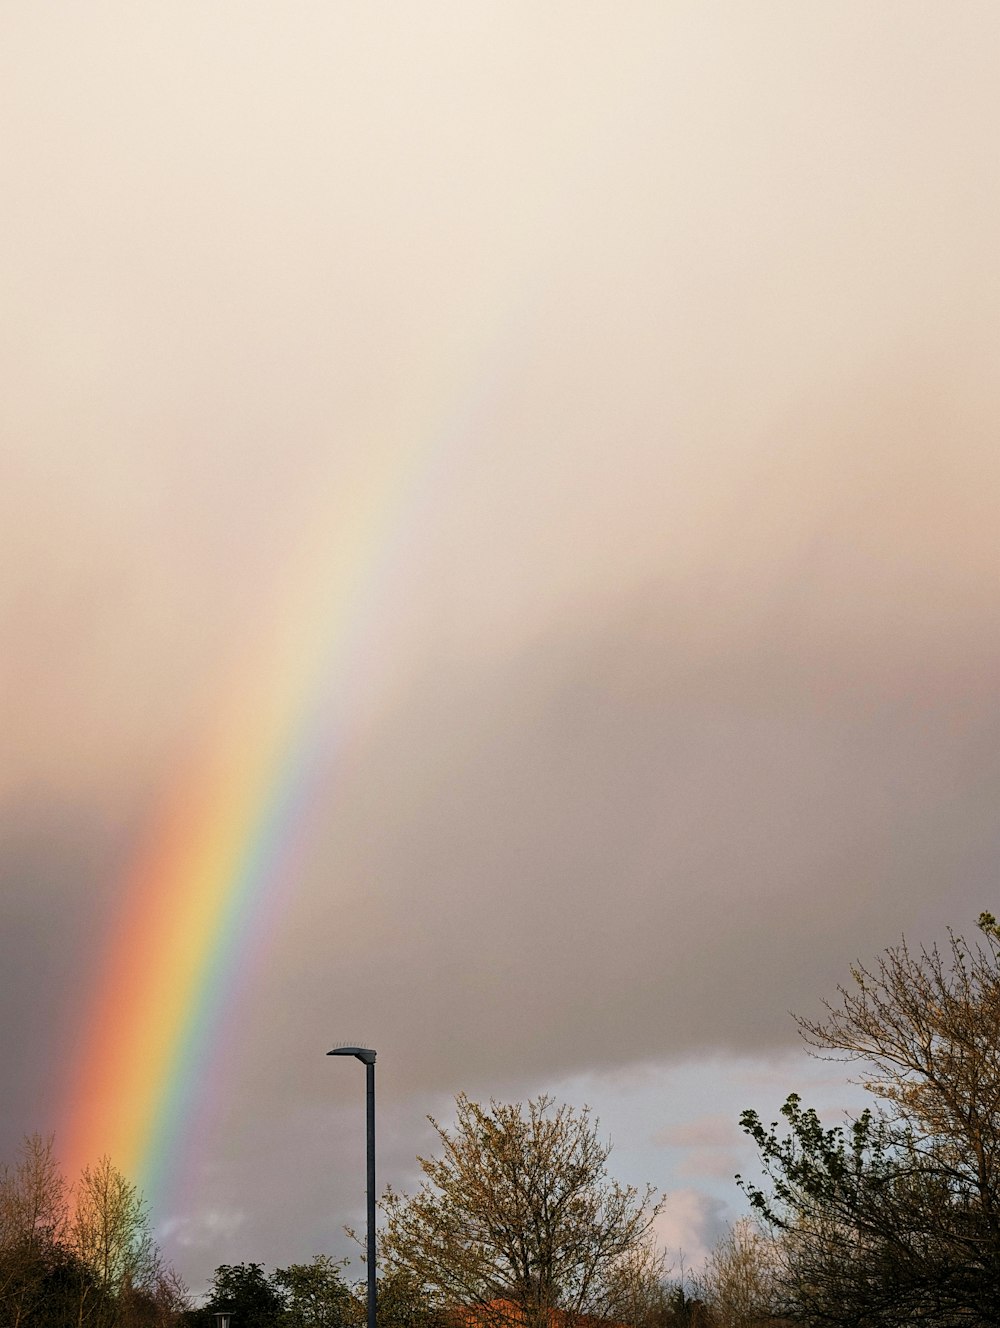 a rainbow appears in the sky over a parking lot